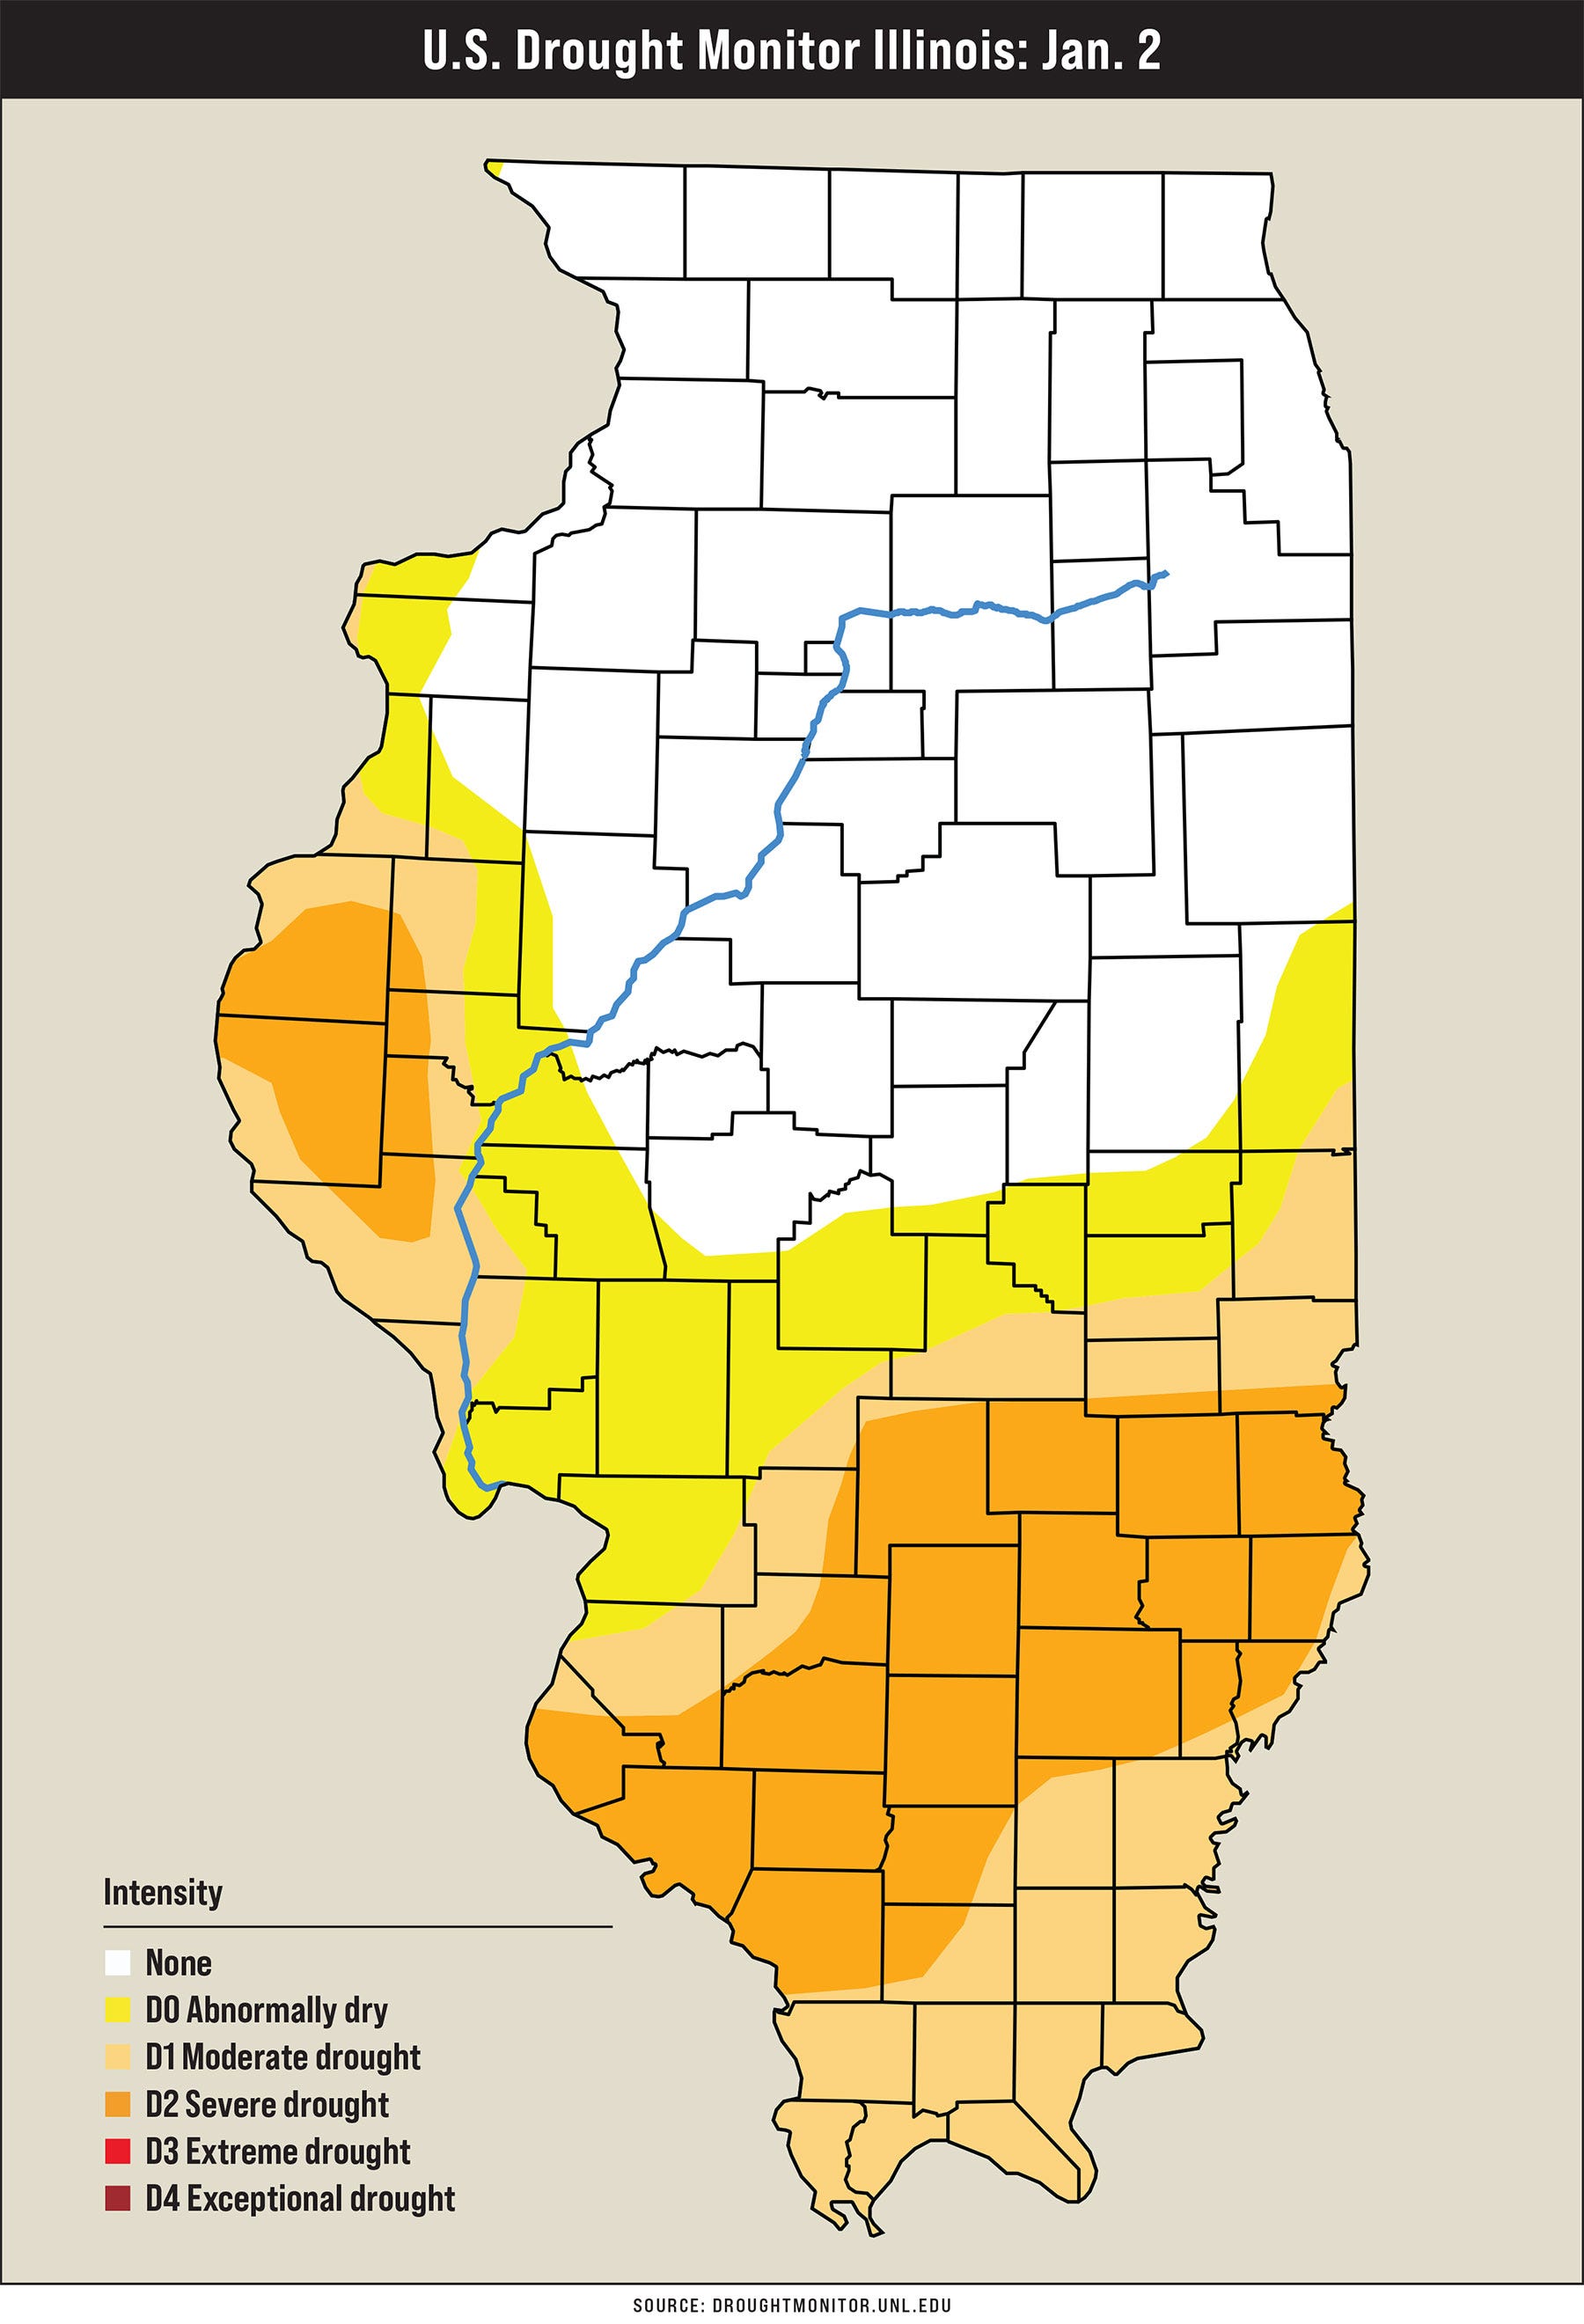 A map illustrating drought intensity in Illinois